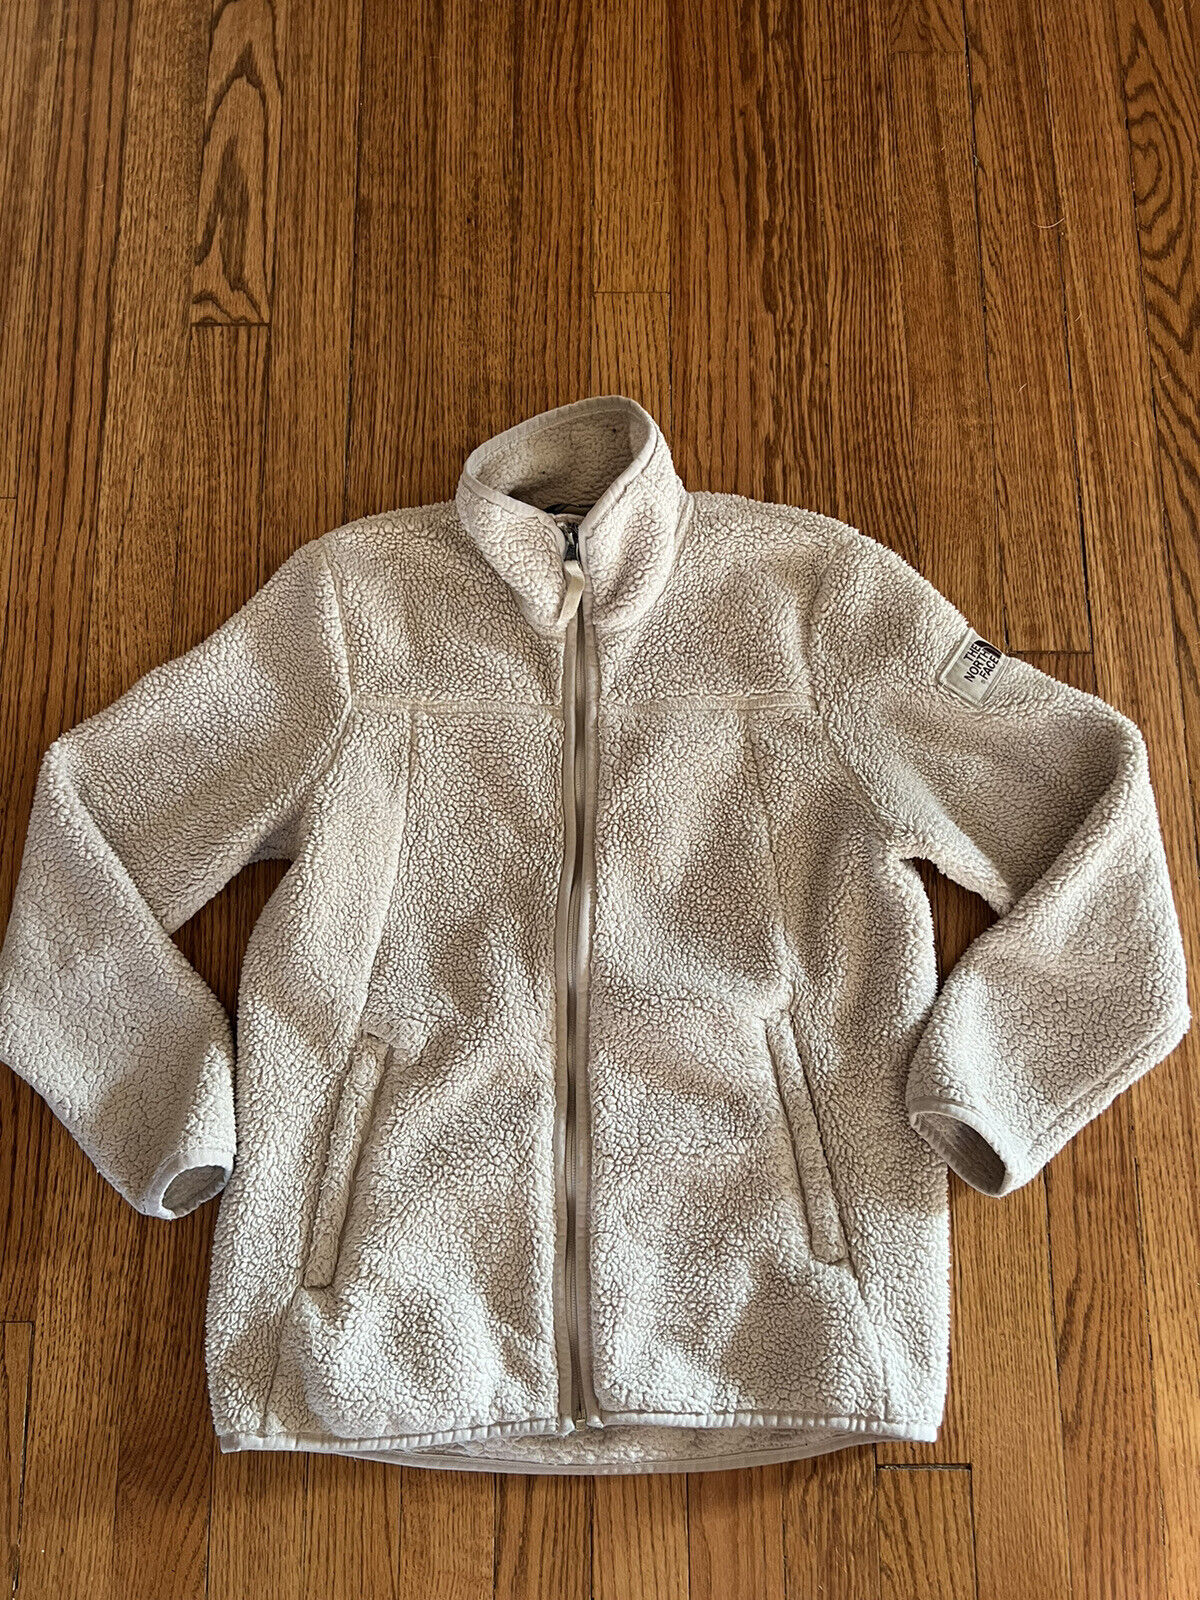 North Face Girls White Sherpa Max 65% OFF Size Zip Up Jacket Large Sale special price